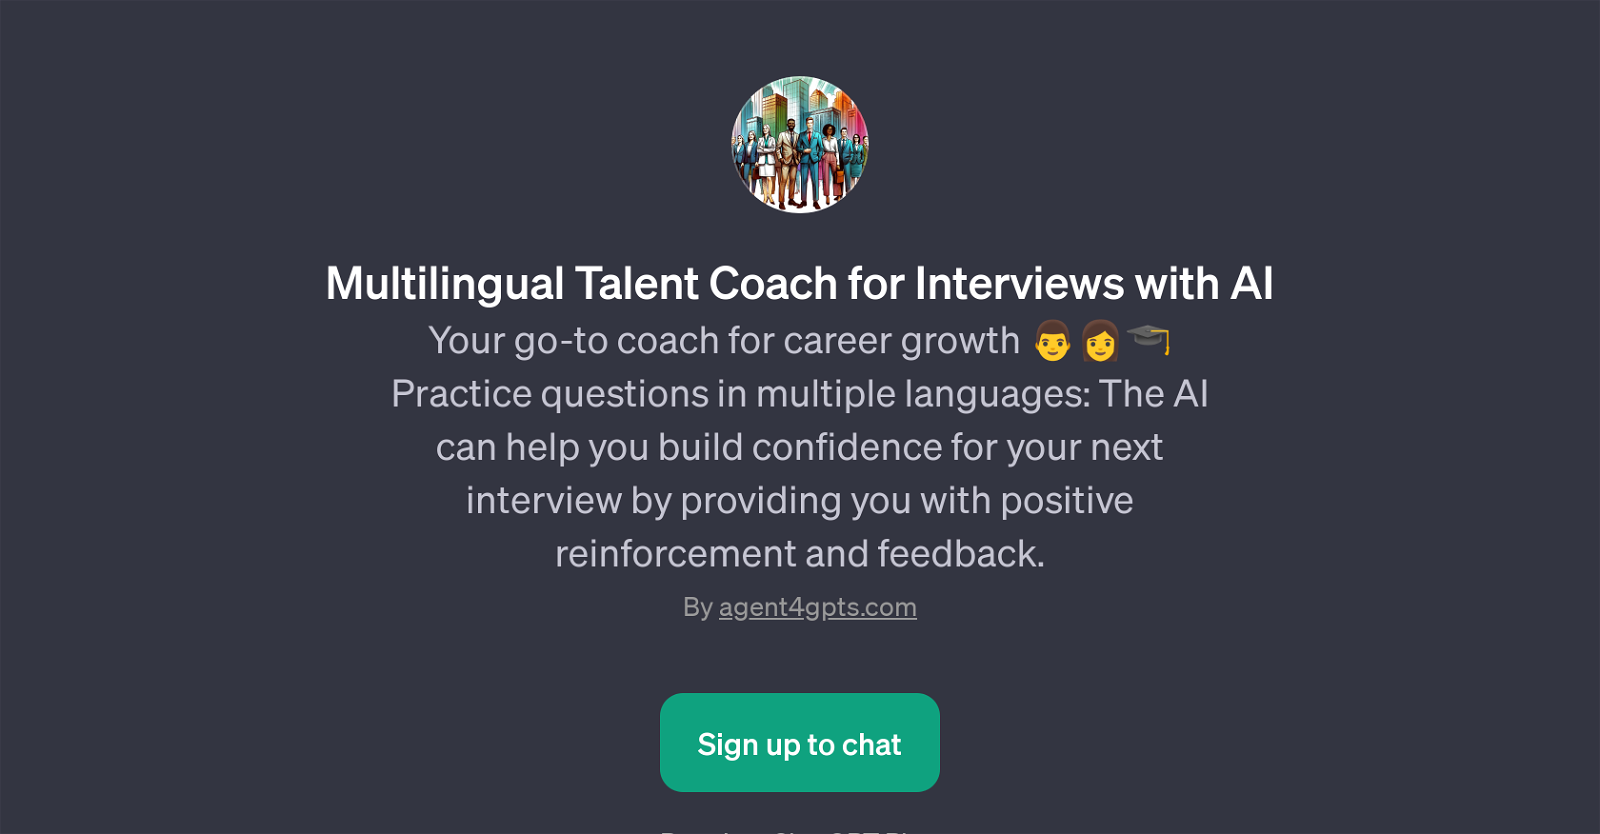 Multilingual Talent Coach for Interviews with AI website